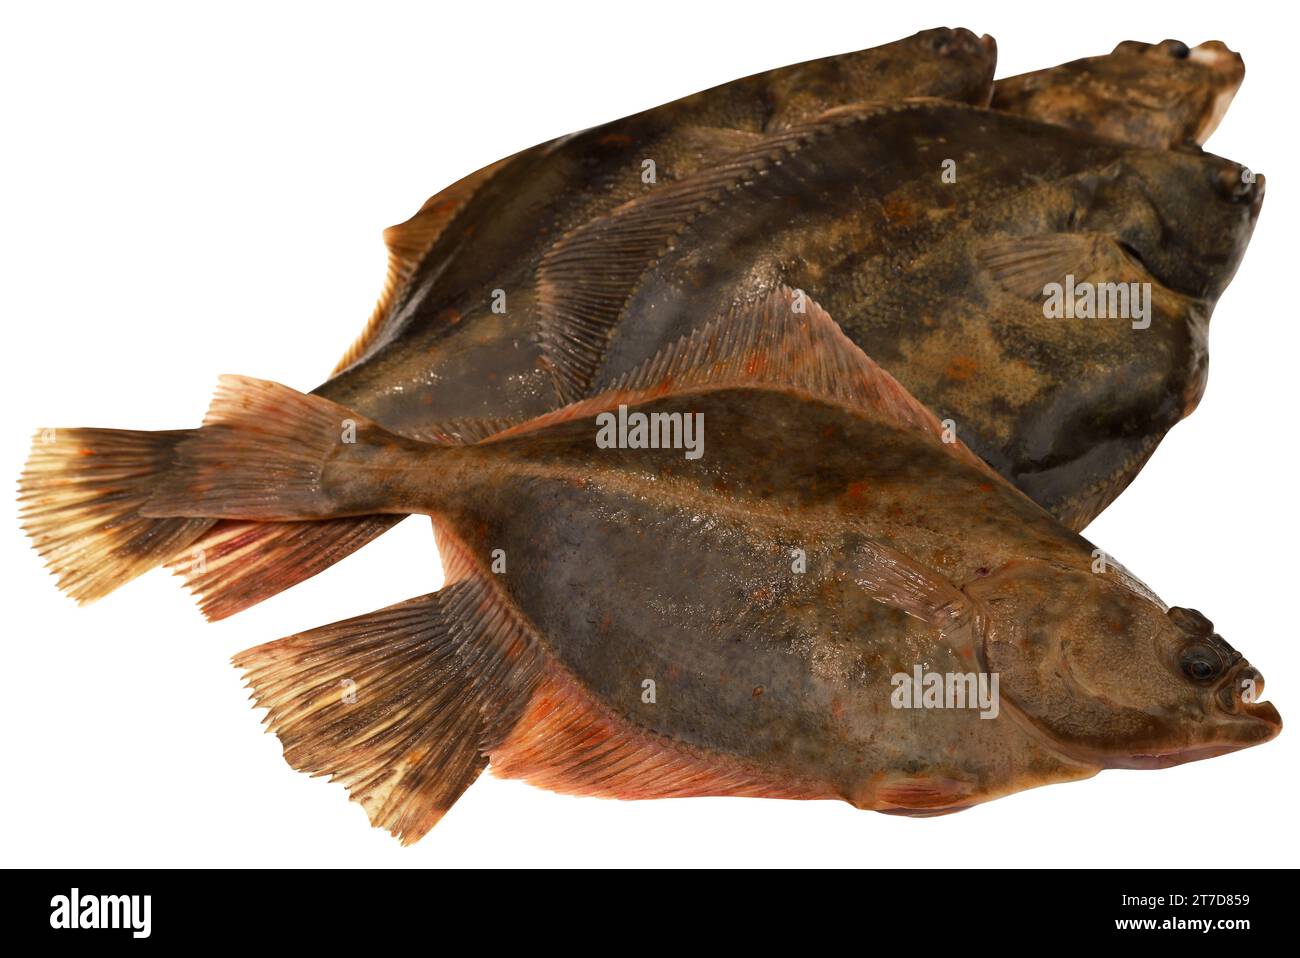 Flatfish caught from sea closeup and isolated Stock Photo